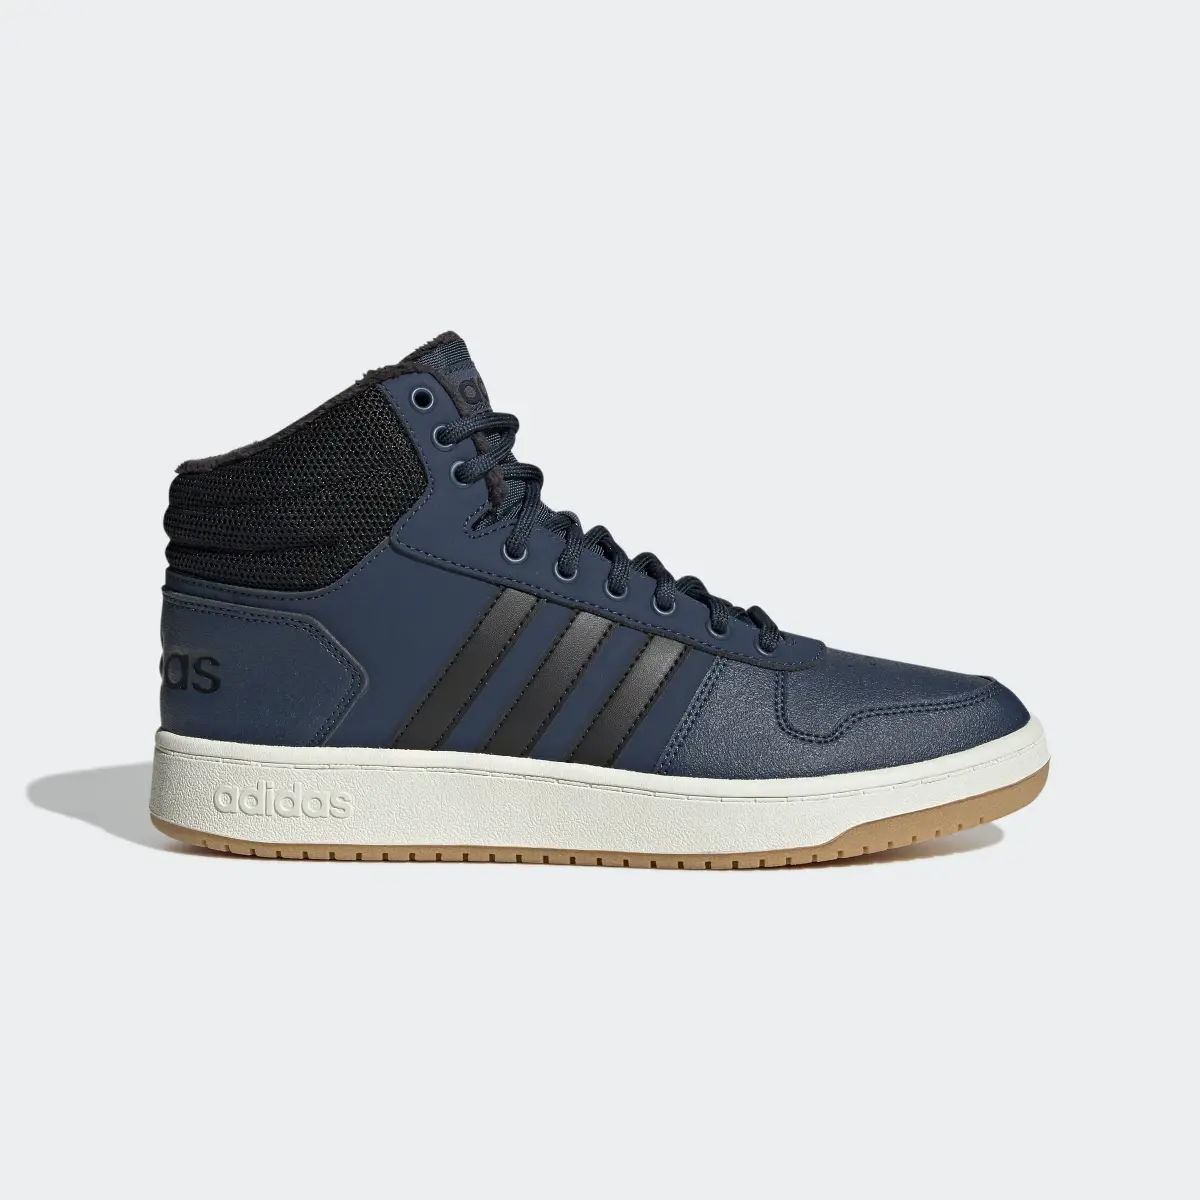 Adidas Hoops 2.0 Mid Shoes. 2